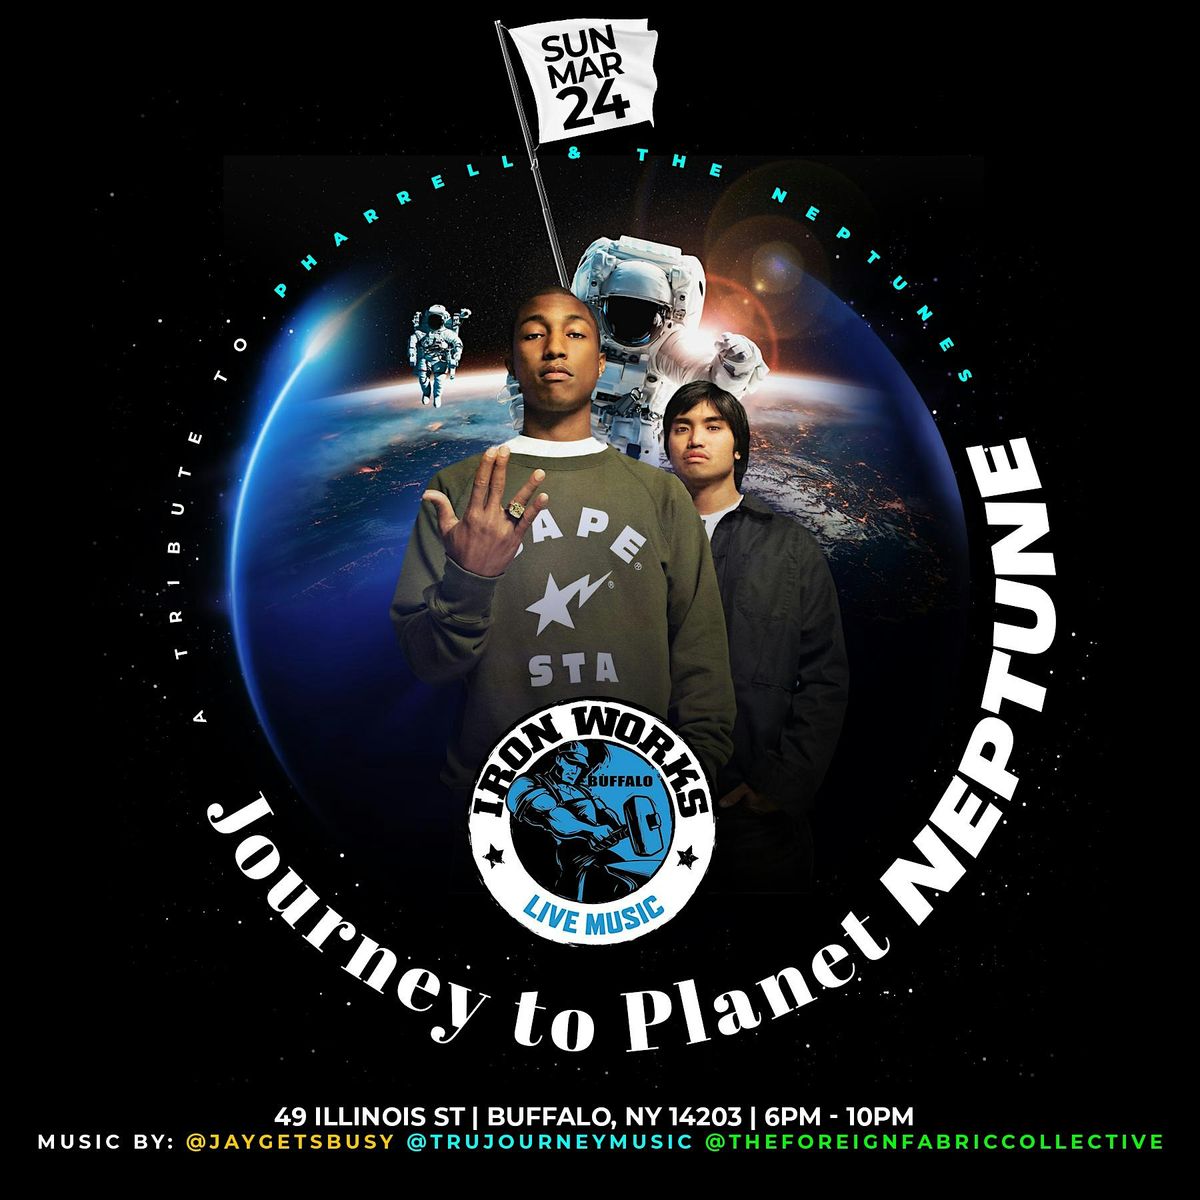 Journey to Planet Neptune: A Tribute to Pharrell Williams and The Neptunes